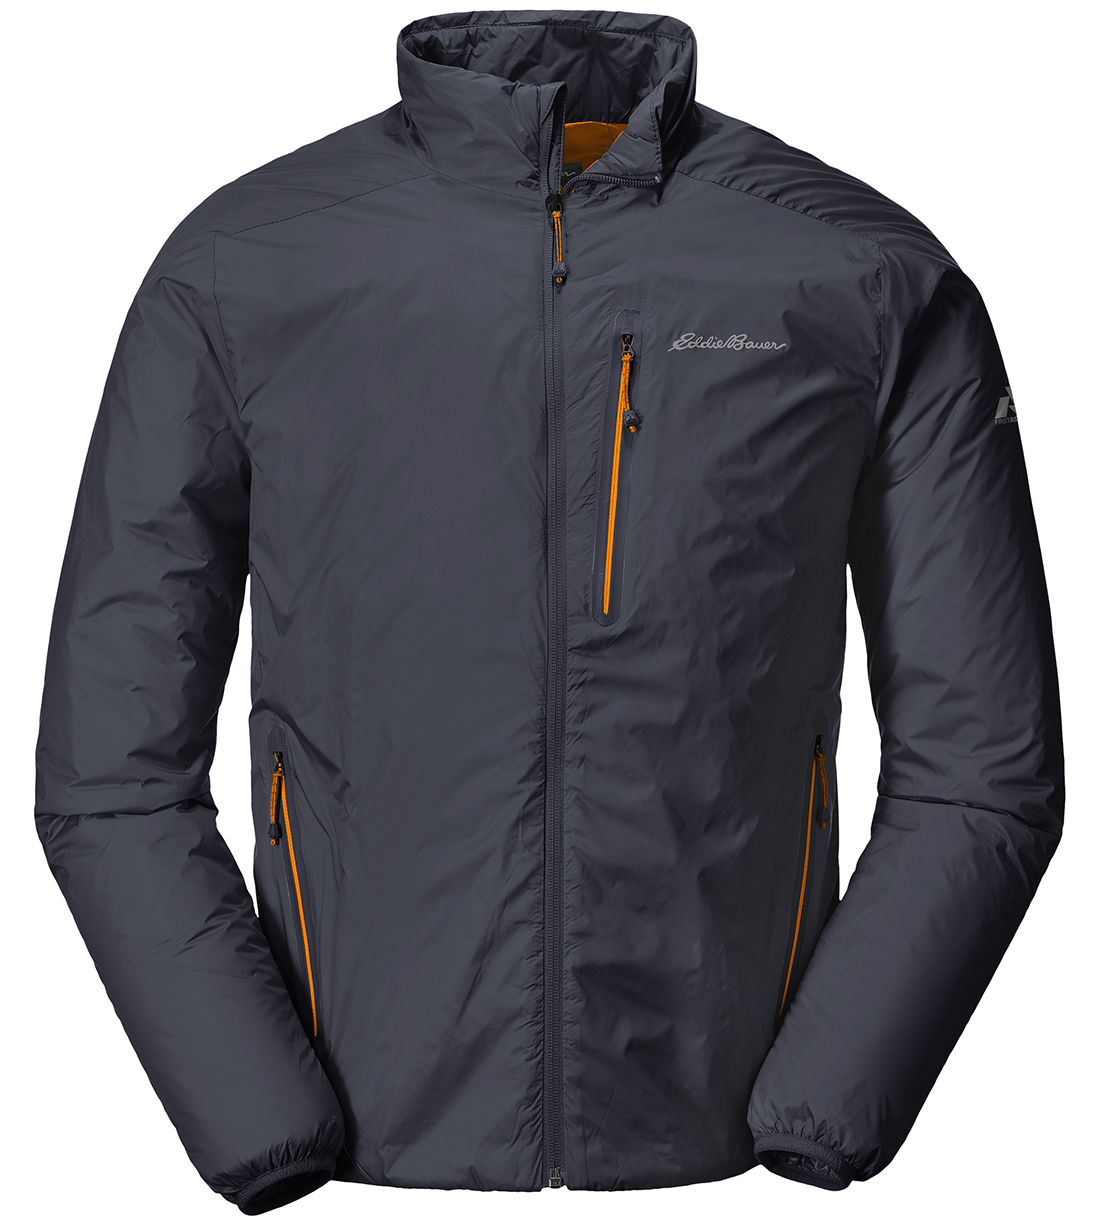 Eddie Bauer EverTherm jacket on Blister Gear Review